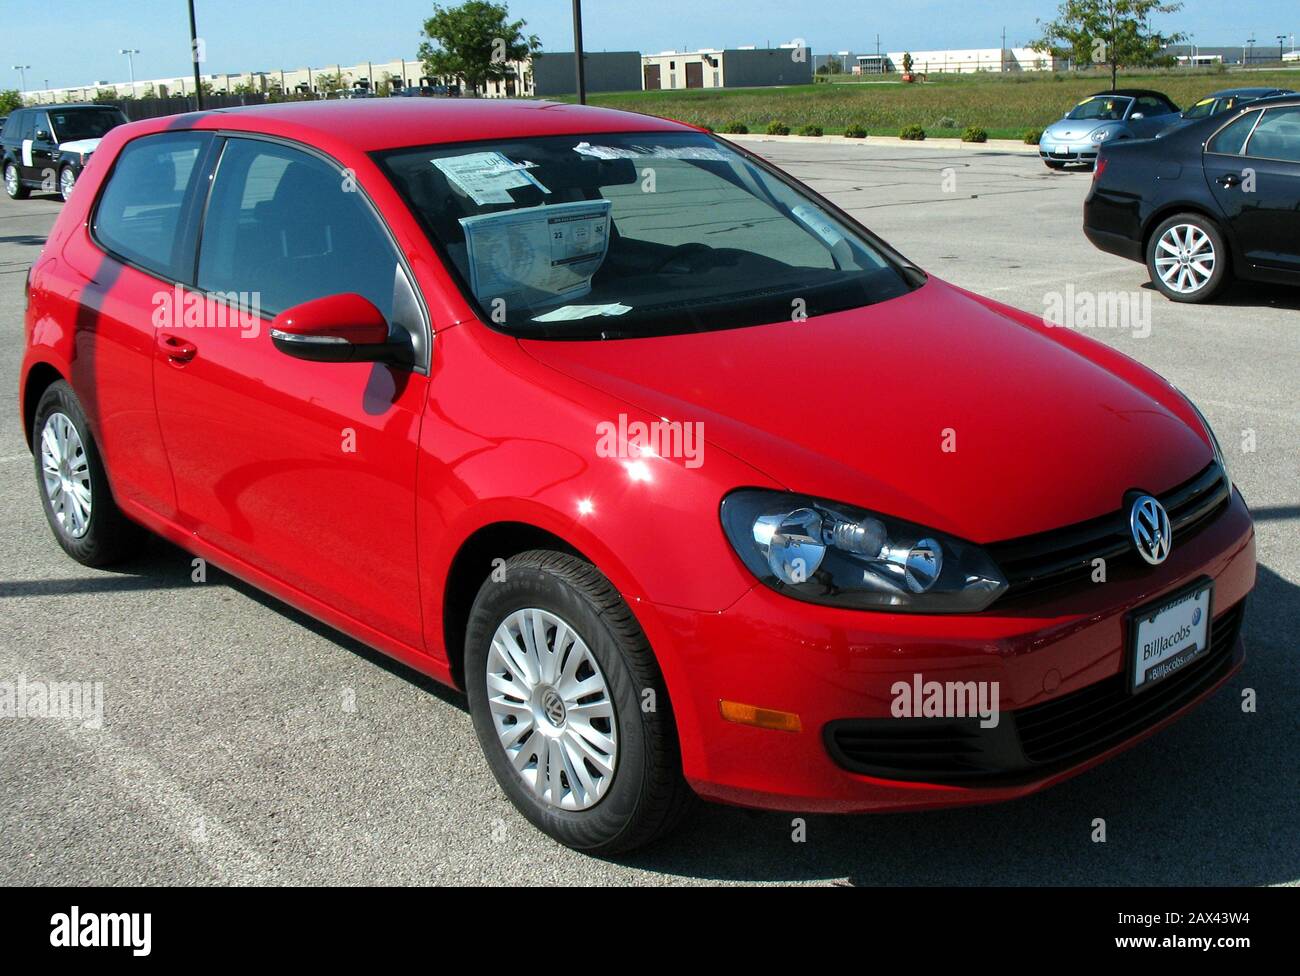 English: 2010 Volkswagen Golf 3-door hatchback, photographed in Naperville,  Illinois, United States.; 17 May 2009 (